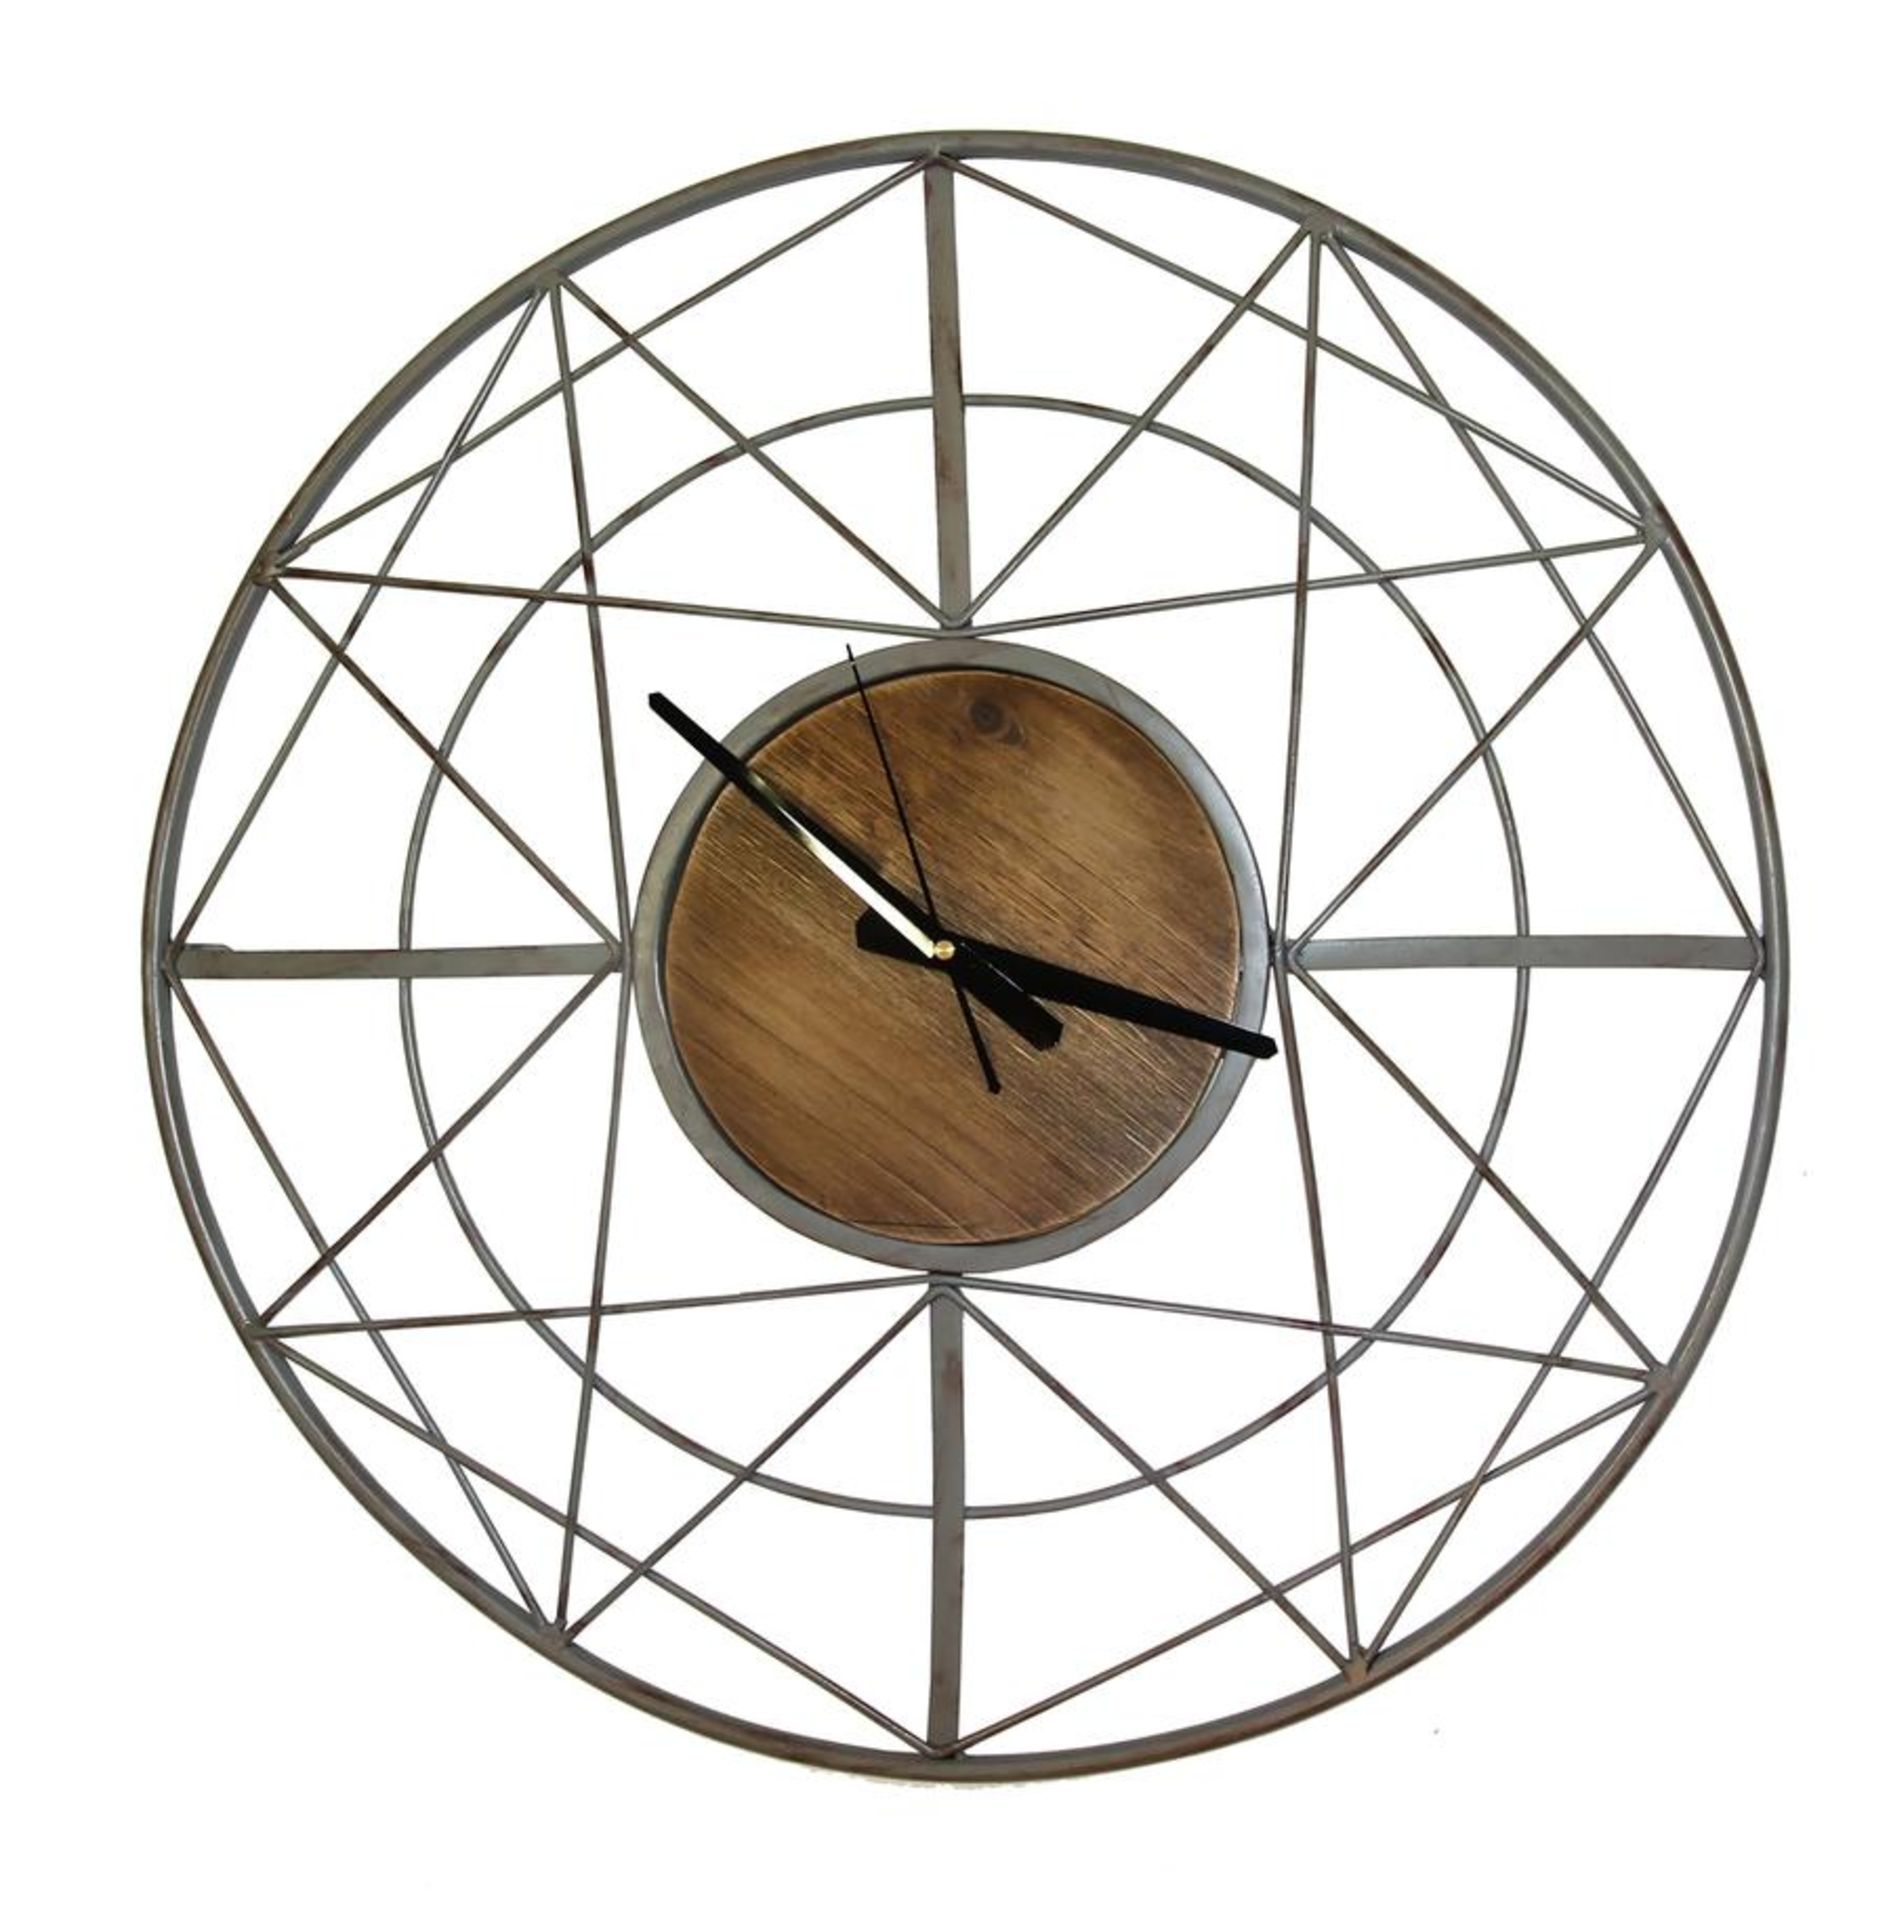 Arthouse Wooden Clock - RRP £50. - Image 2 of 2